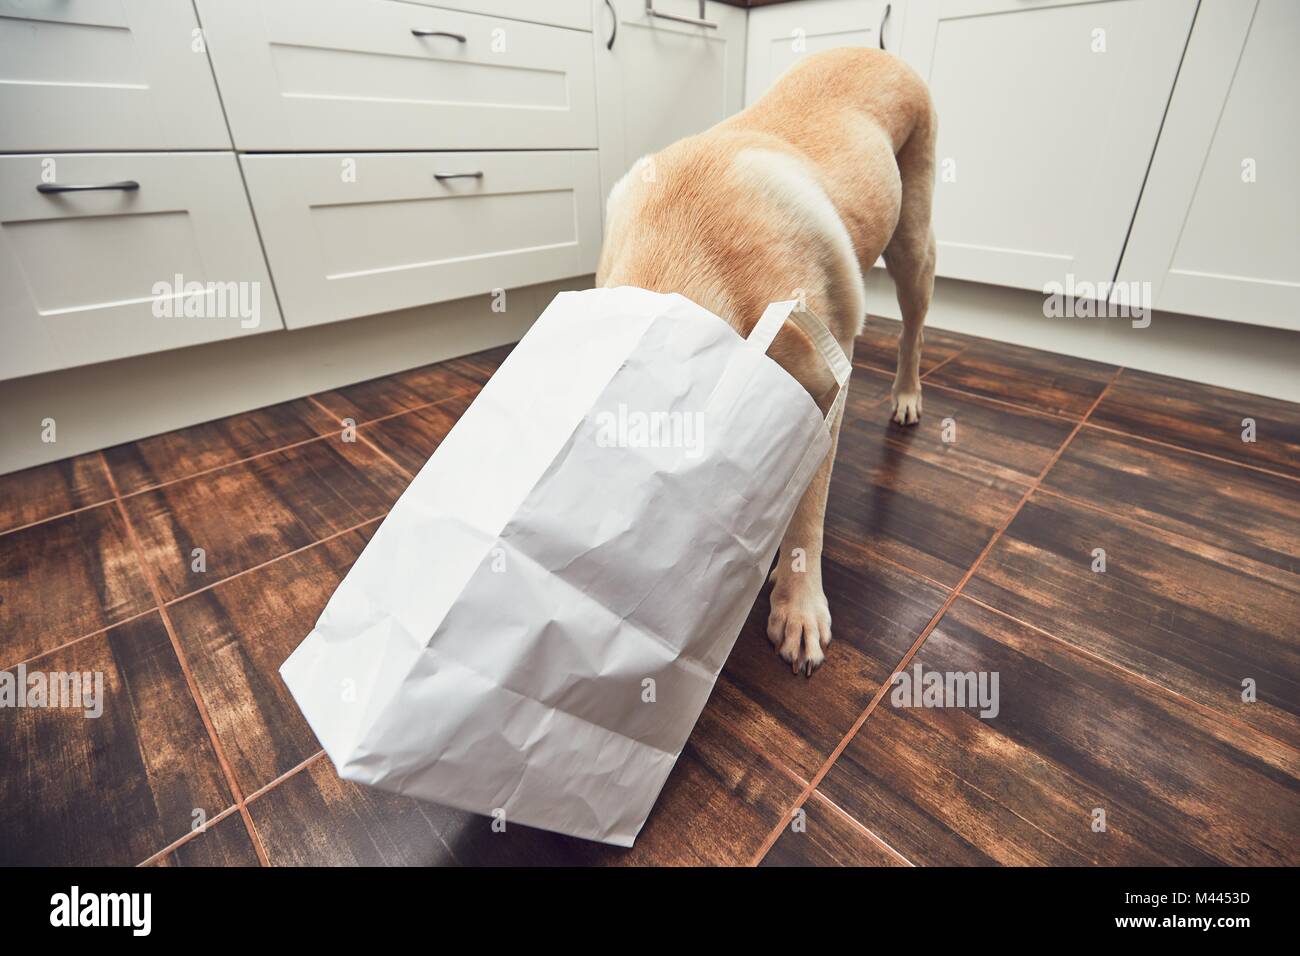 Naughty dog in home kitchen. Curious and hungry labrador retriever eating purchase  from the paper bag. Stock Photo